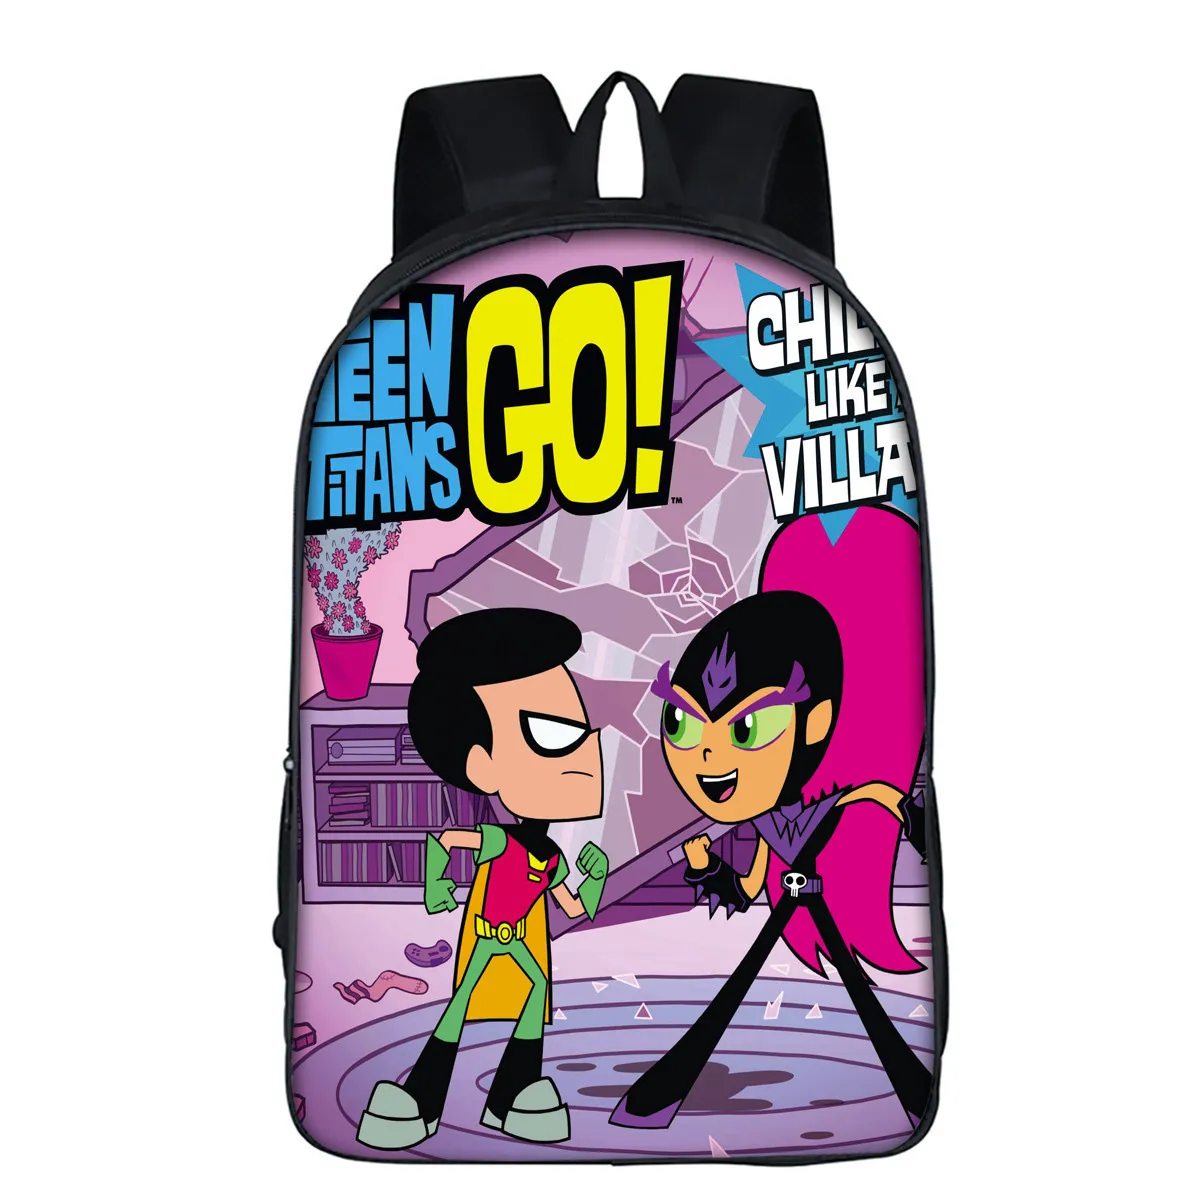 Diomo Cartoon Anime Teen Titans Go Backpack School Bags Gift For Boy With Girl Kids Children Rucksack Teenager Child J1905229013222